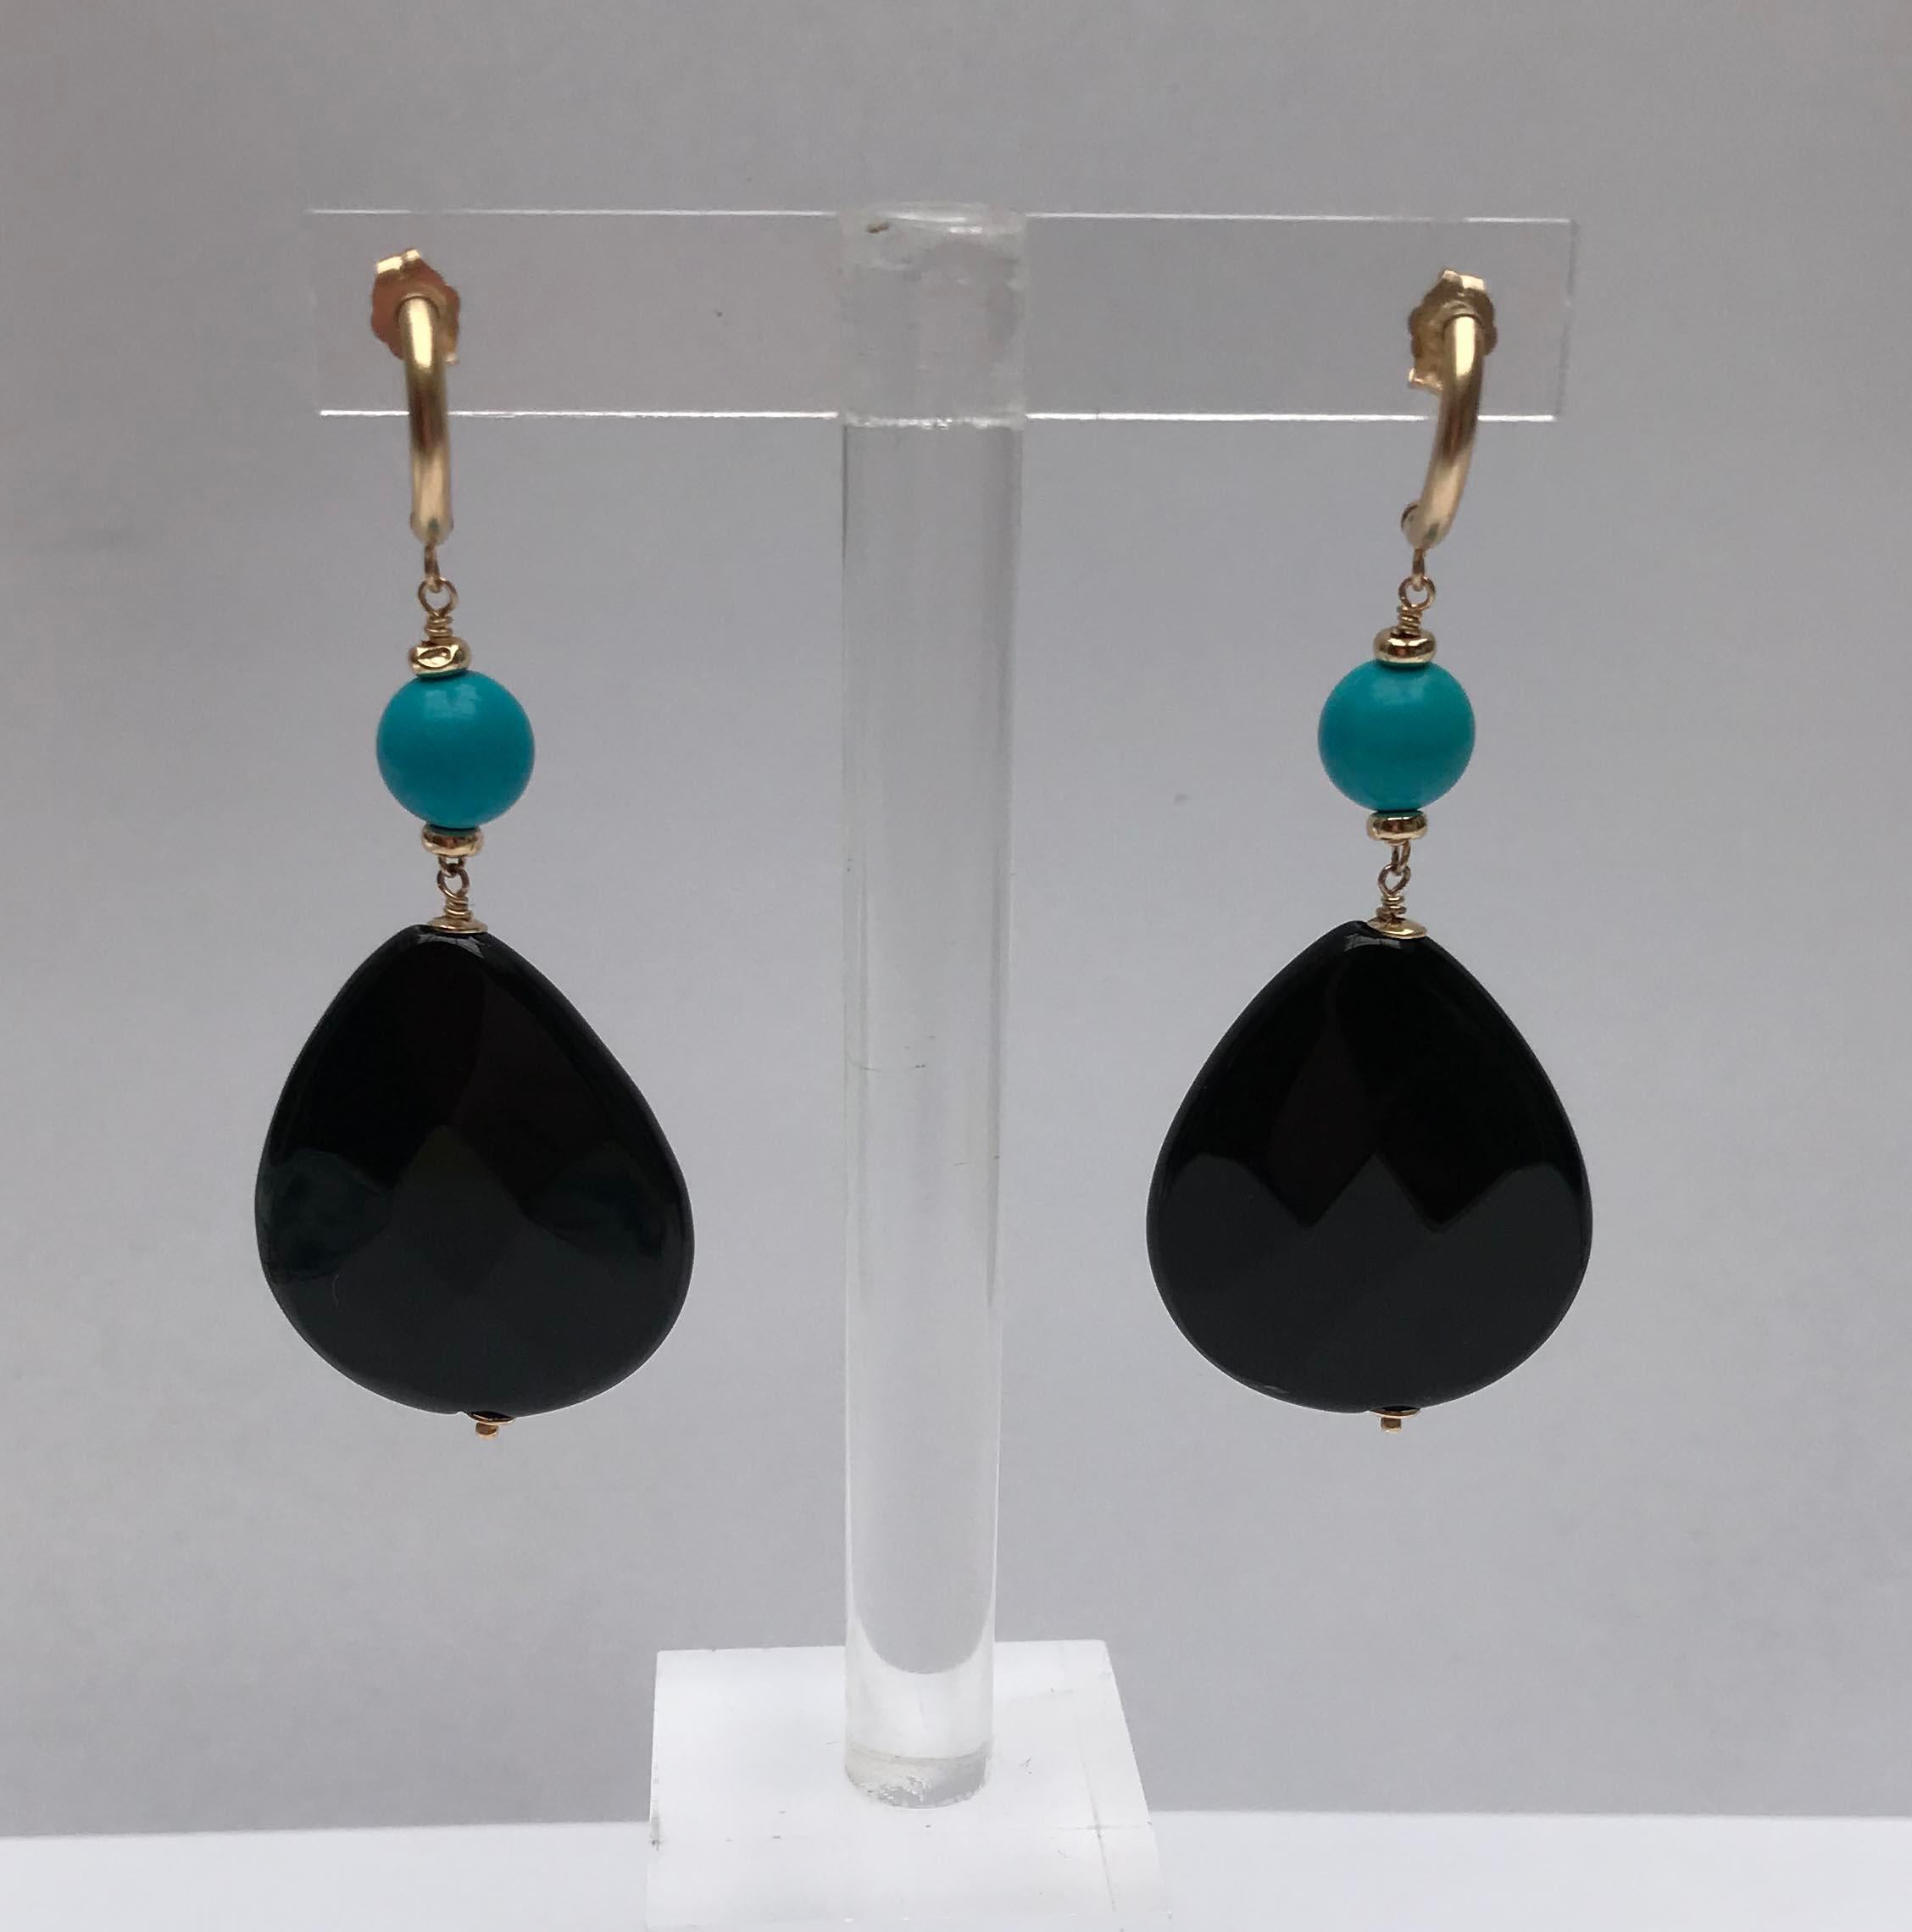 Marina J. designs presents a turquoise and onyx earrings with 14k yellow gold stud. These beautiful stoned earrings make a bold statement with the large drop shape onyx bead and also gives vibrant color with the turquoise. The earrings are